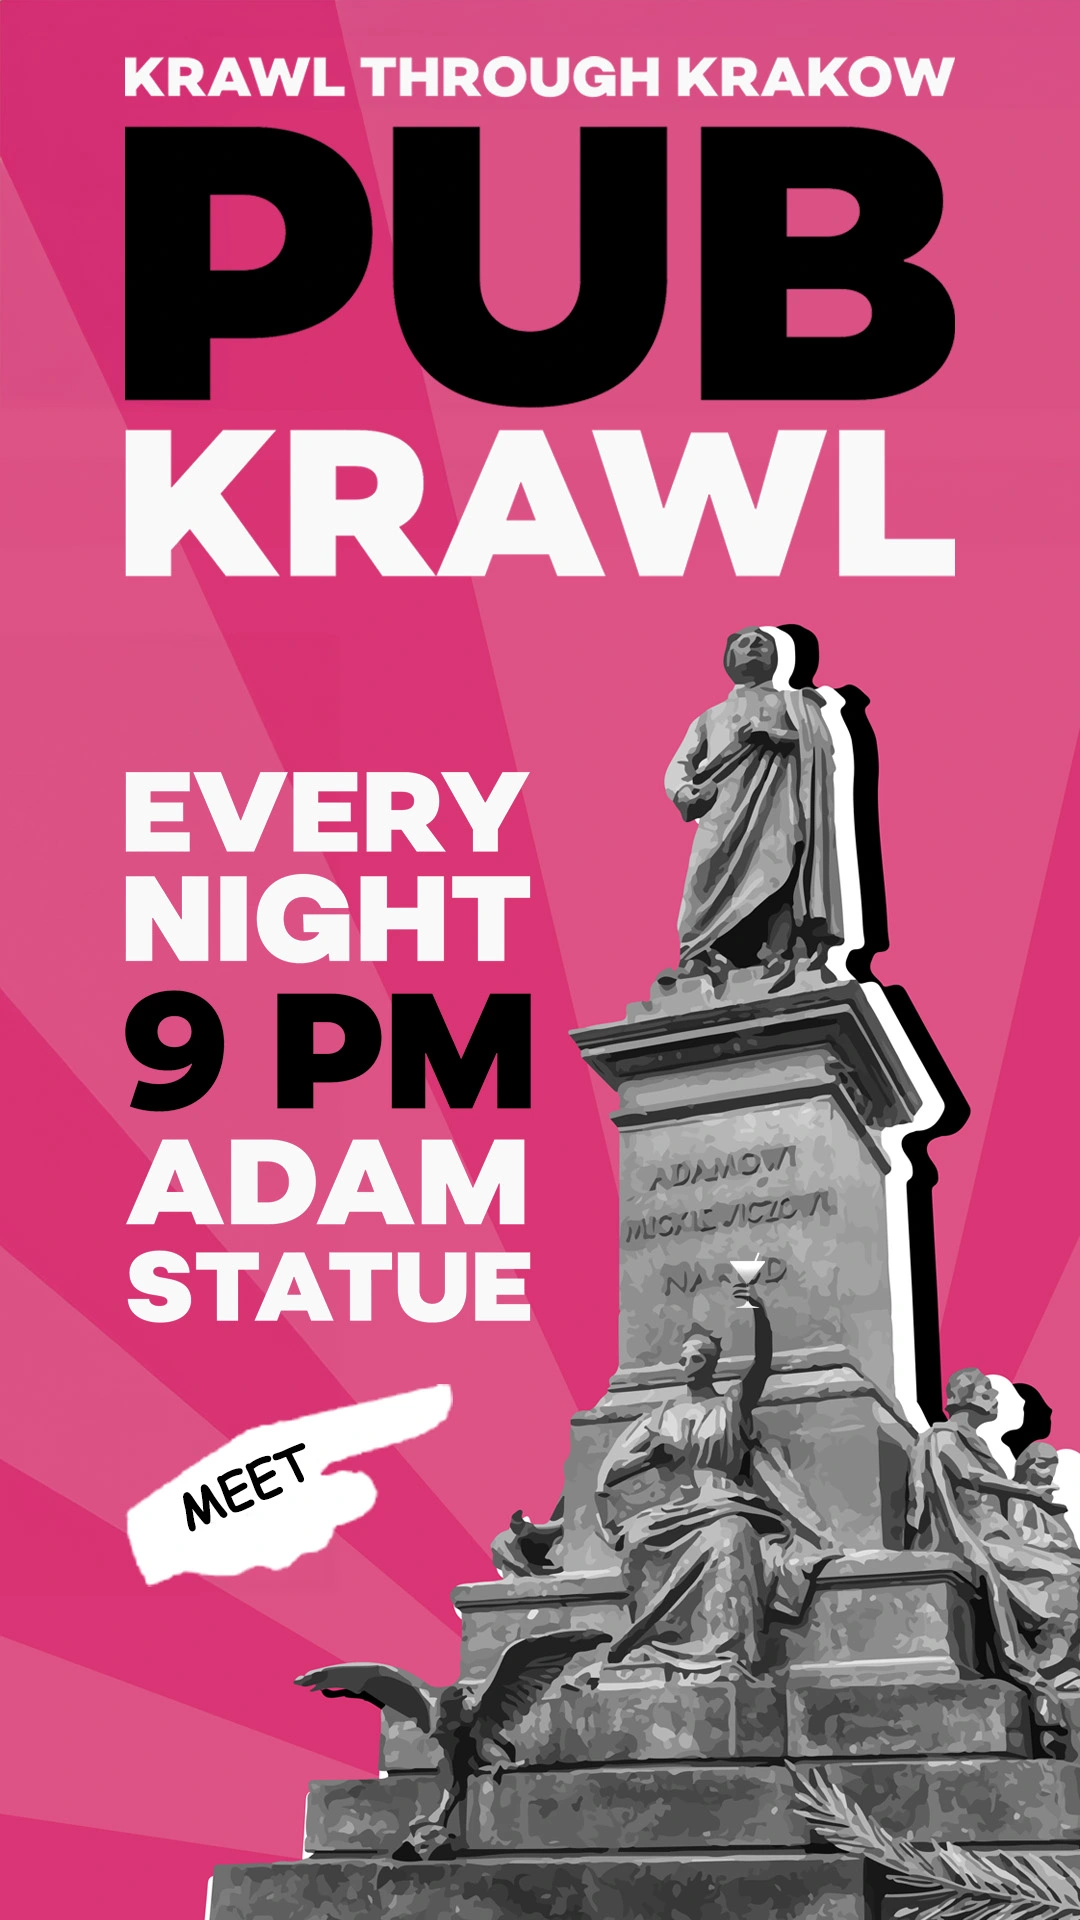 Promotional poster for "Krakow pub crawl" event featuring Adam Mickiewicz monument, with event details overlaid in bright text.